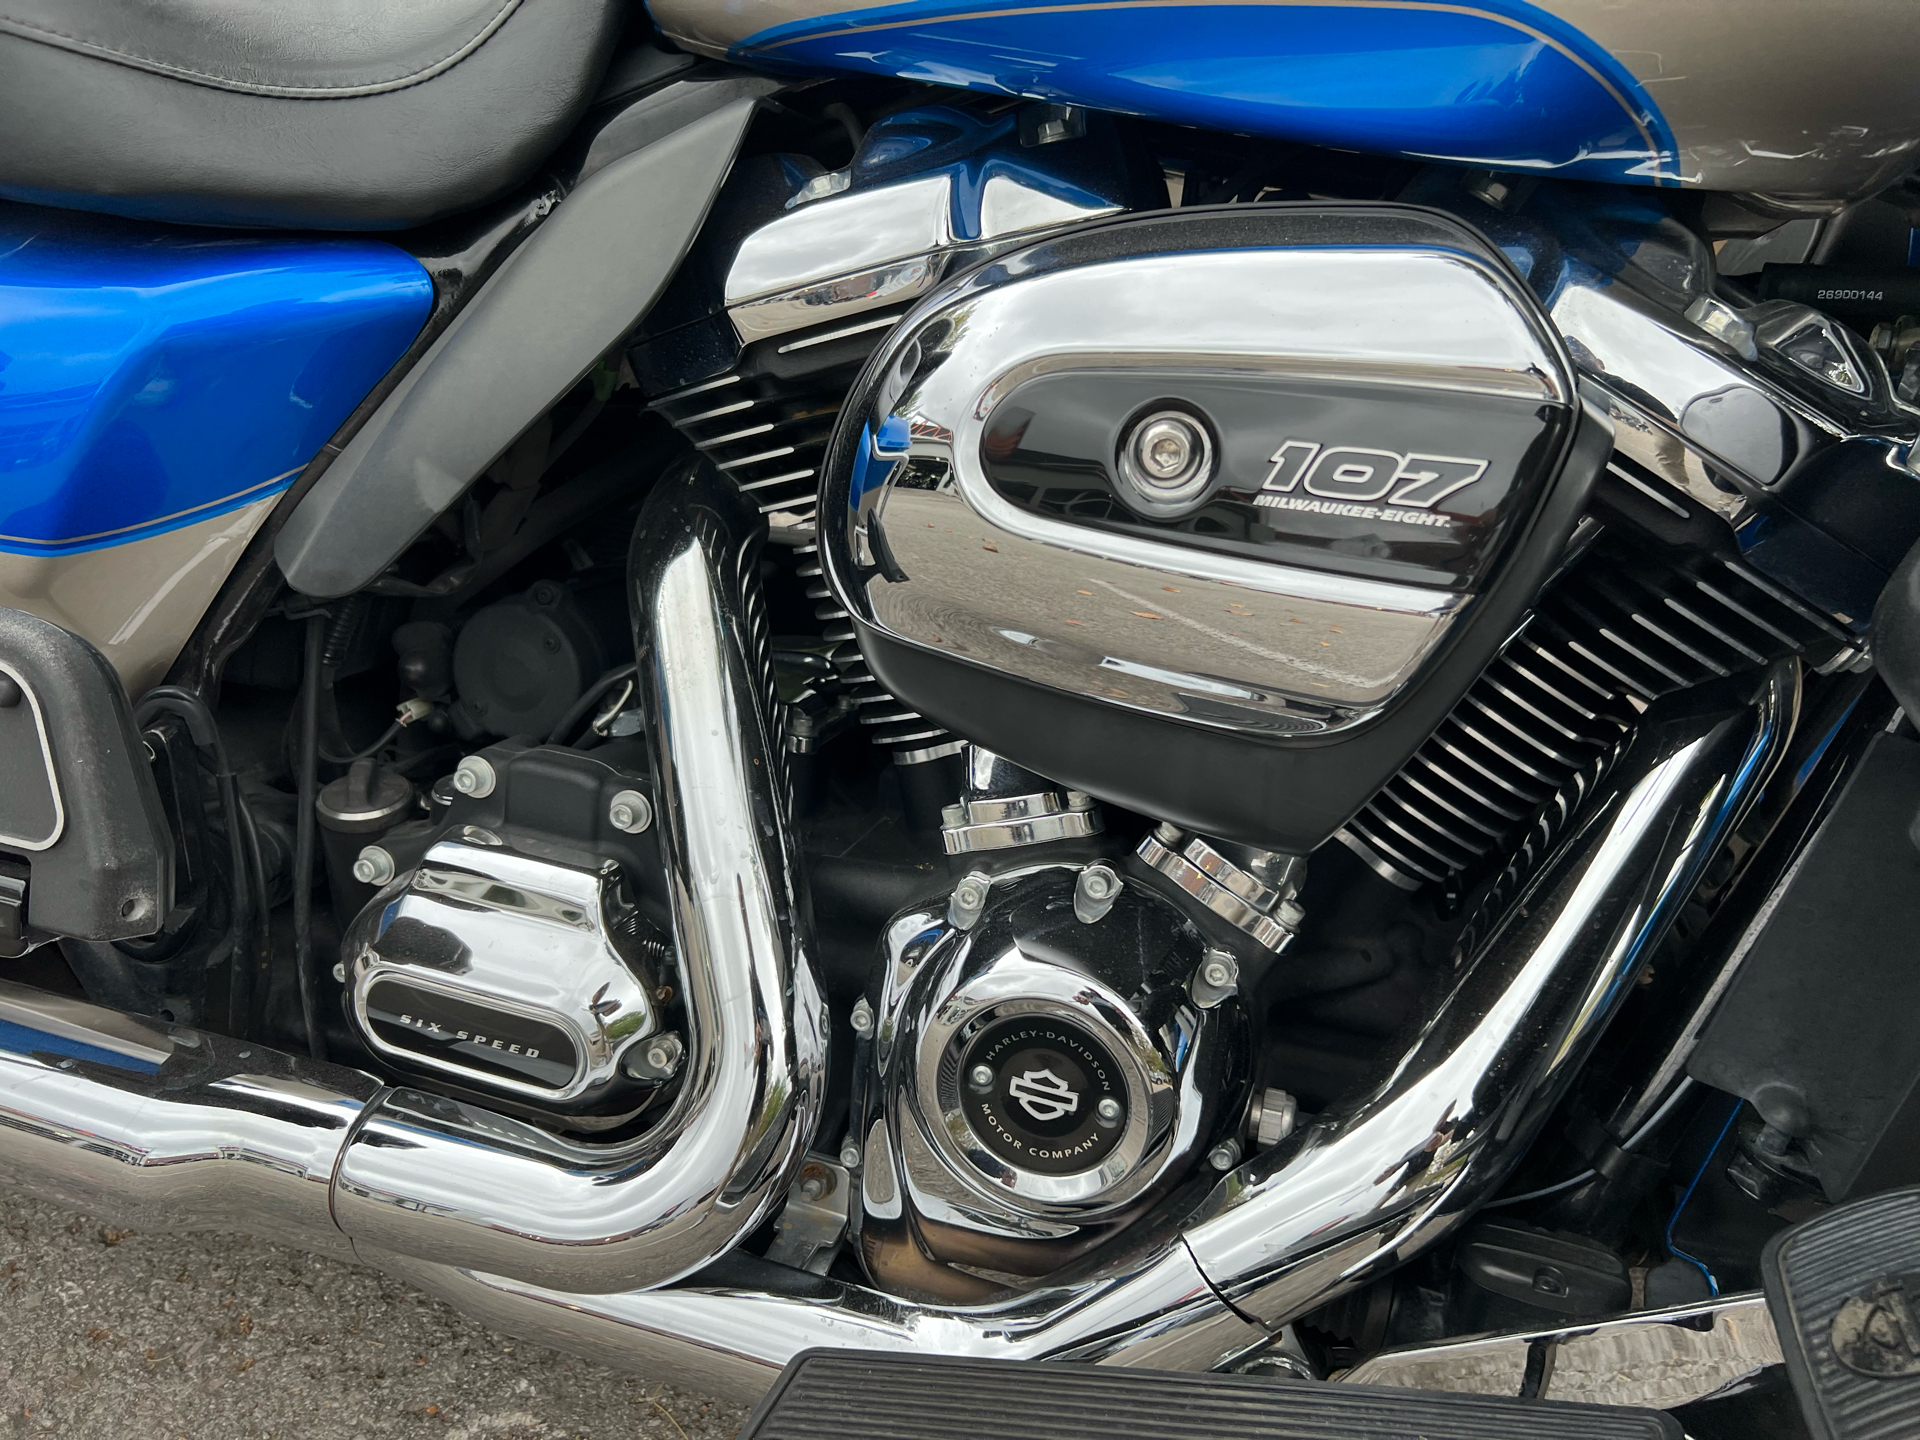 2018 Harley-Davidson Electra Glide® Ultra Classic® in Franklin, Tennessee - Photo 2